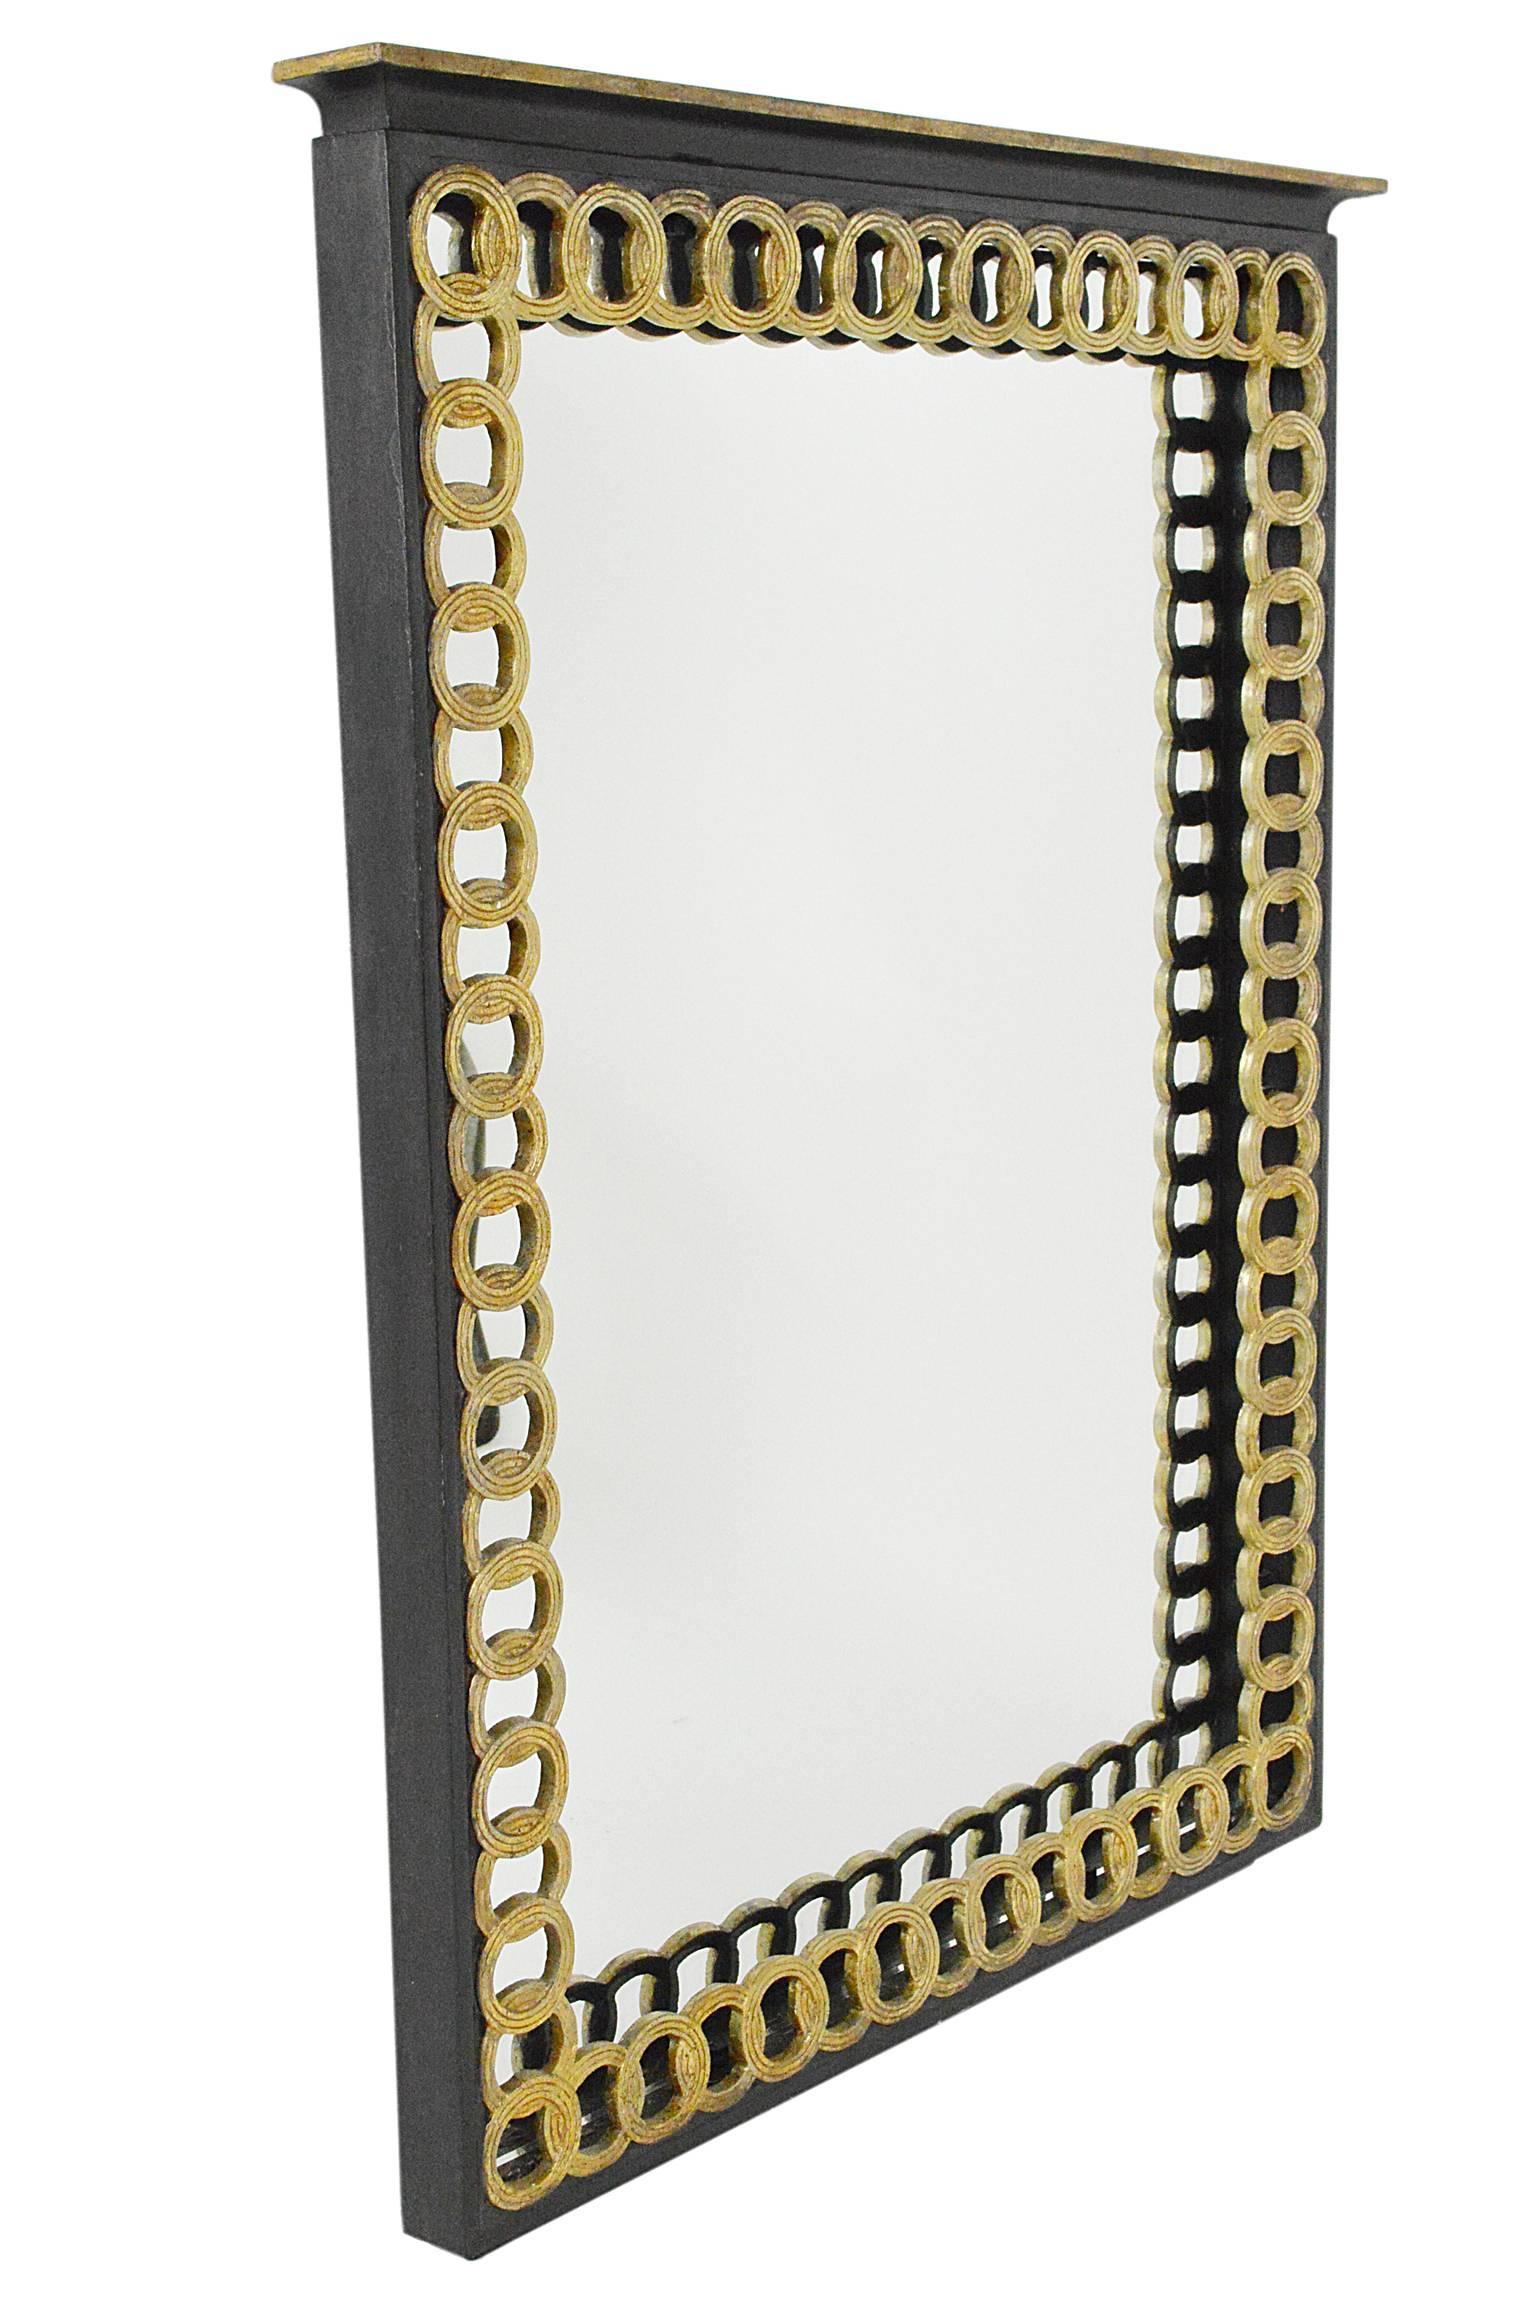 Hollywood Regency style mirror with chain link motif.